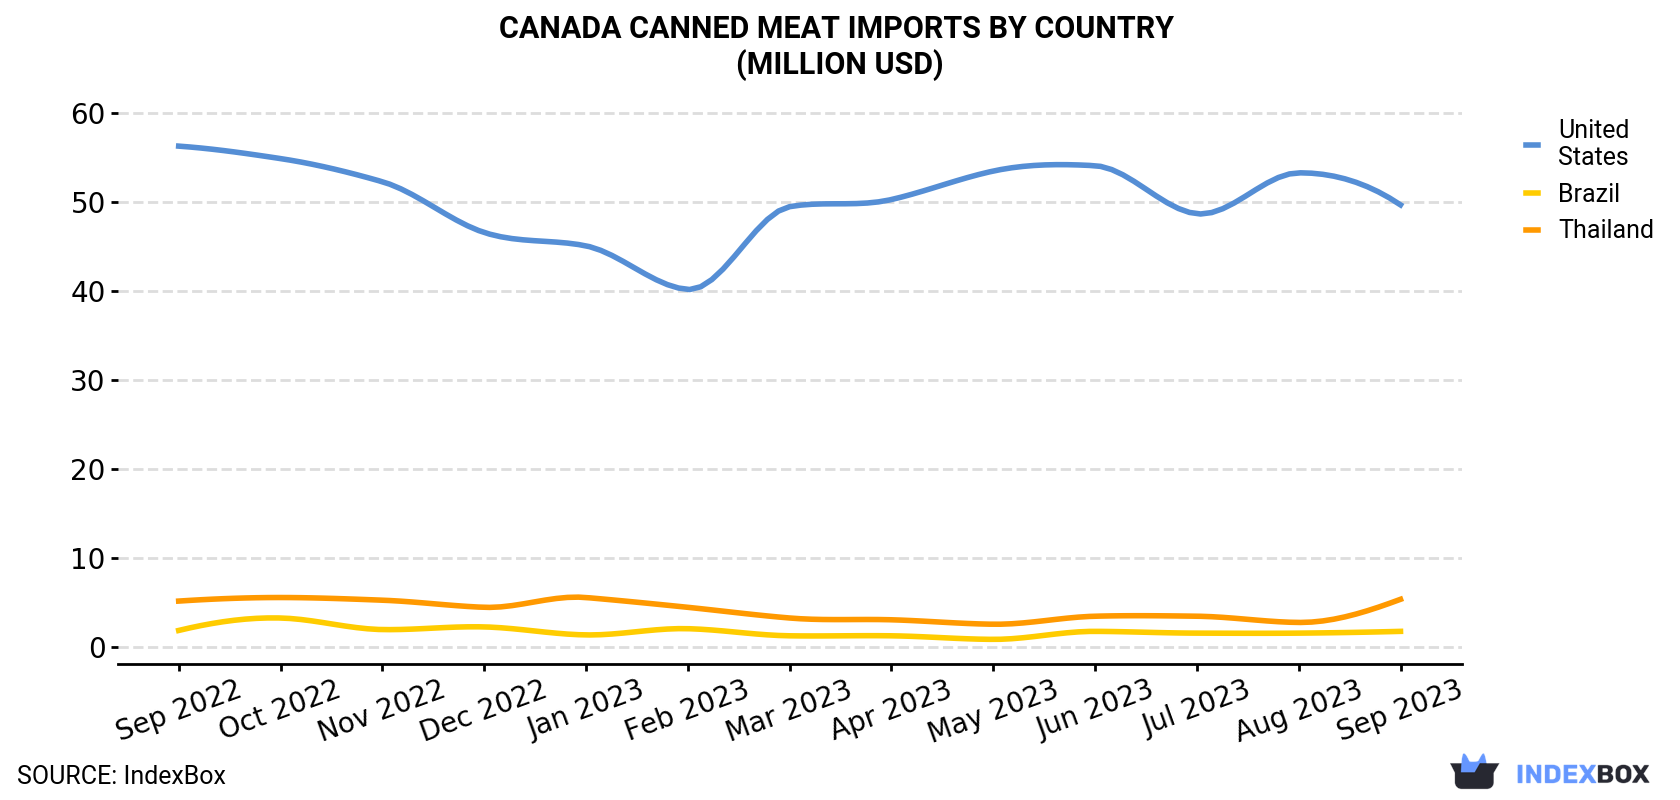 Canada Canned Meat Imports By Country (Million USD)